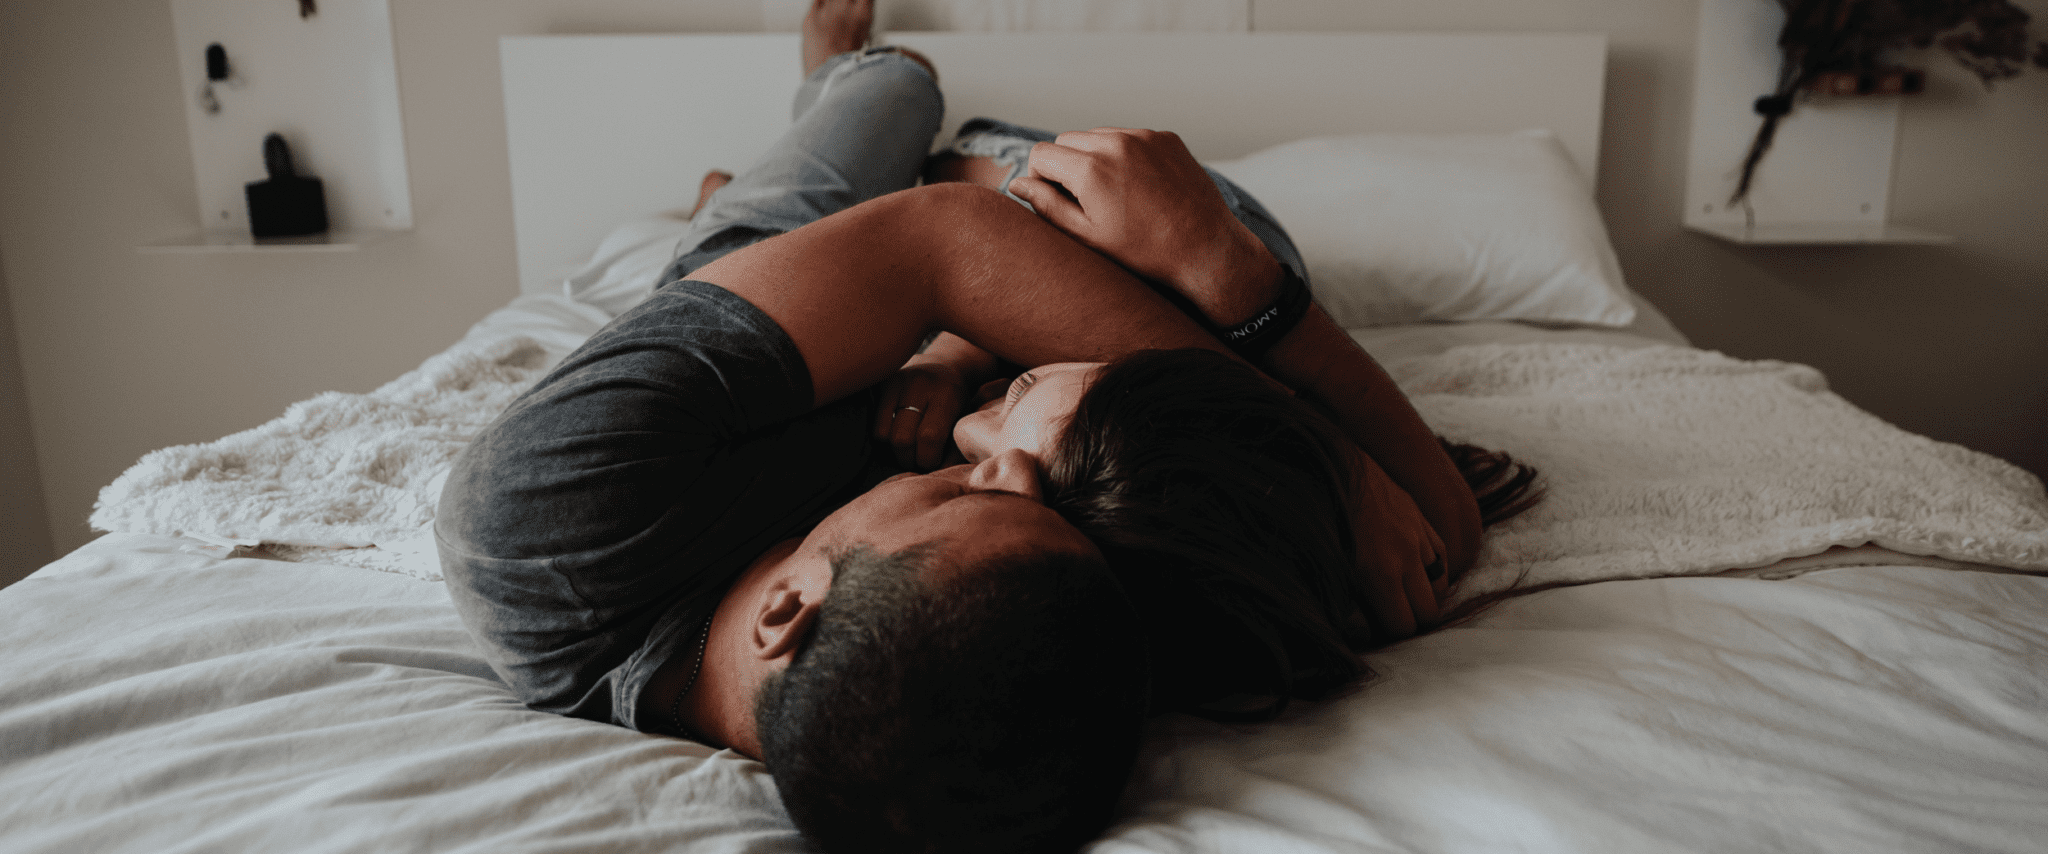 5 Tips To Keep Sex Healthy In Your Marriage Sex Image Hq